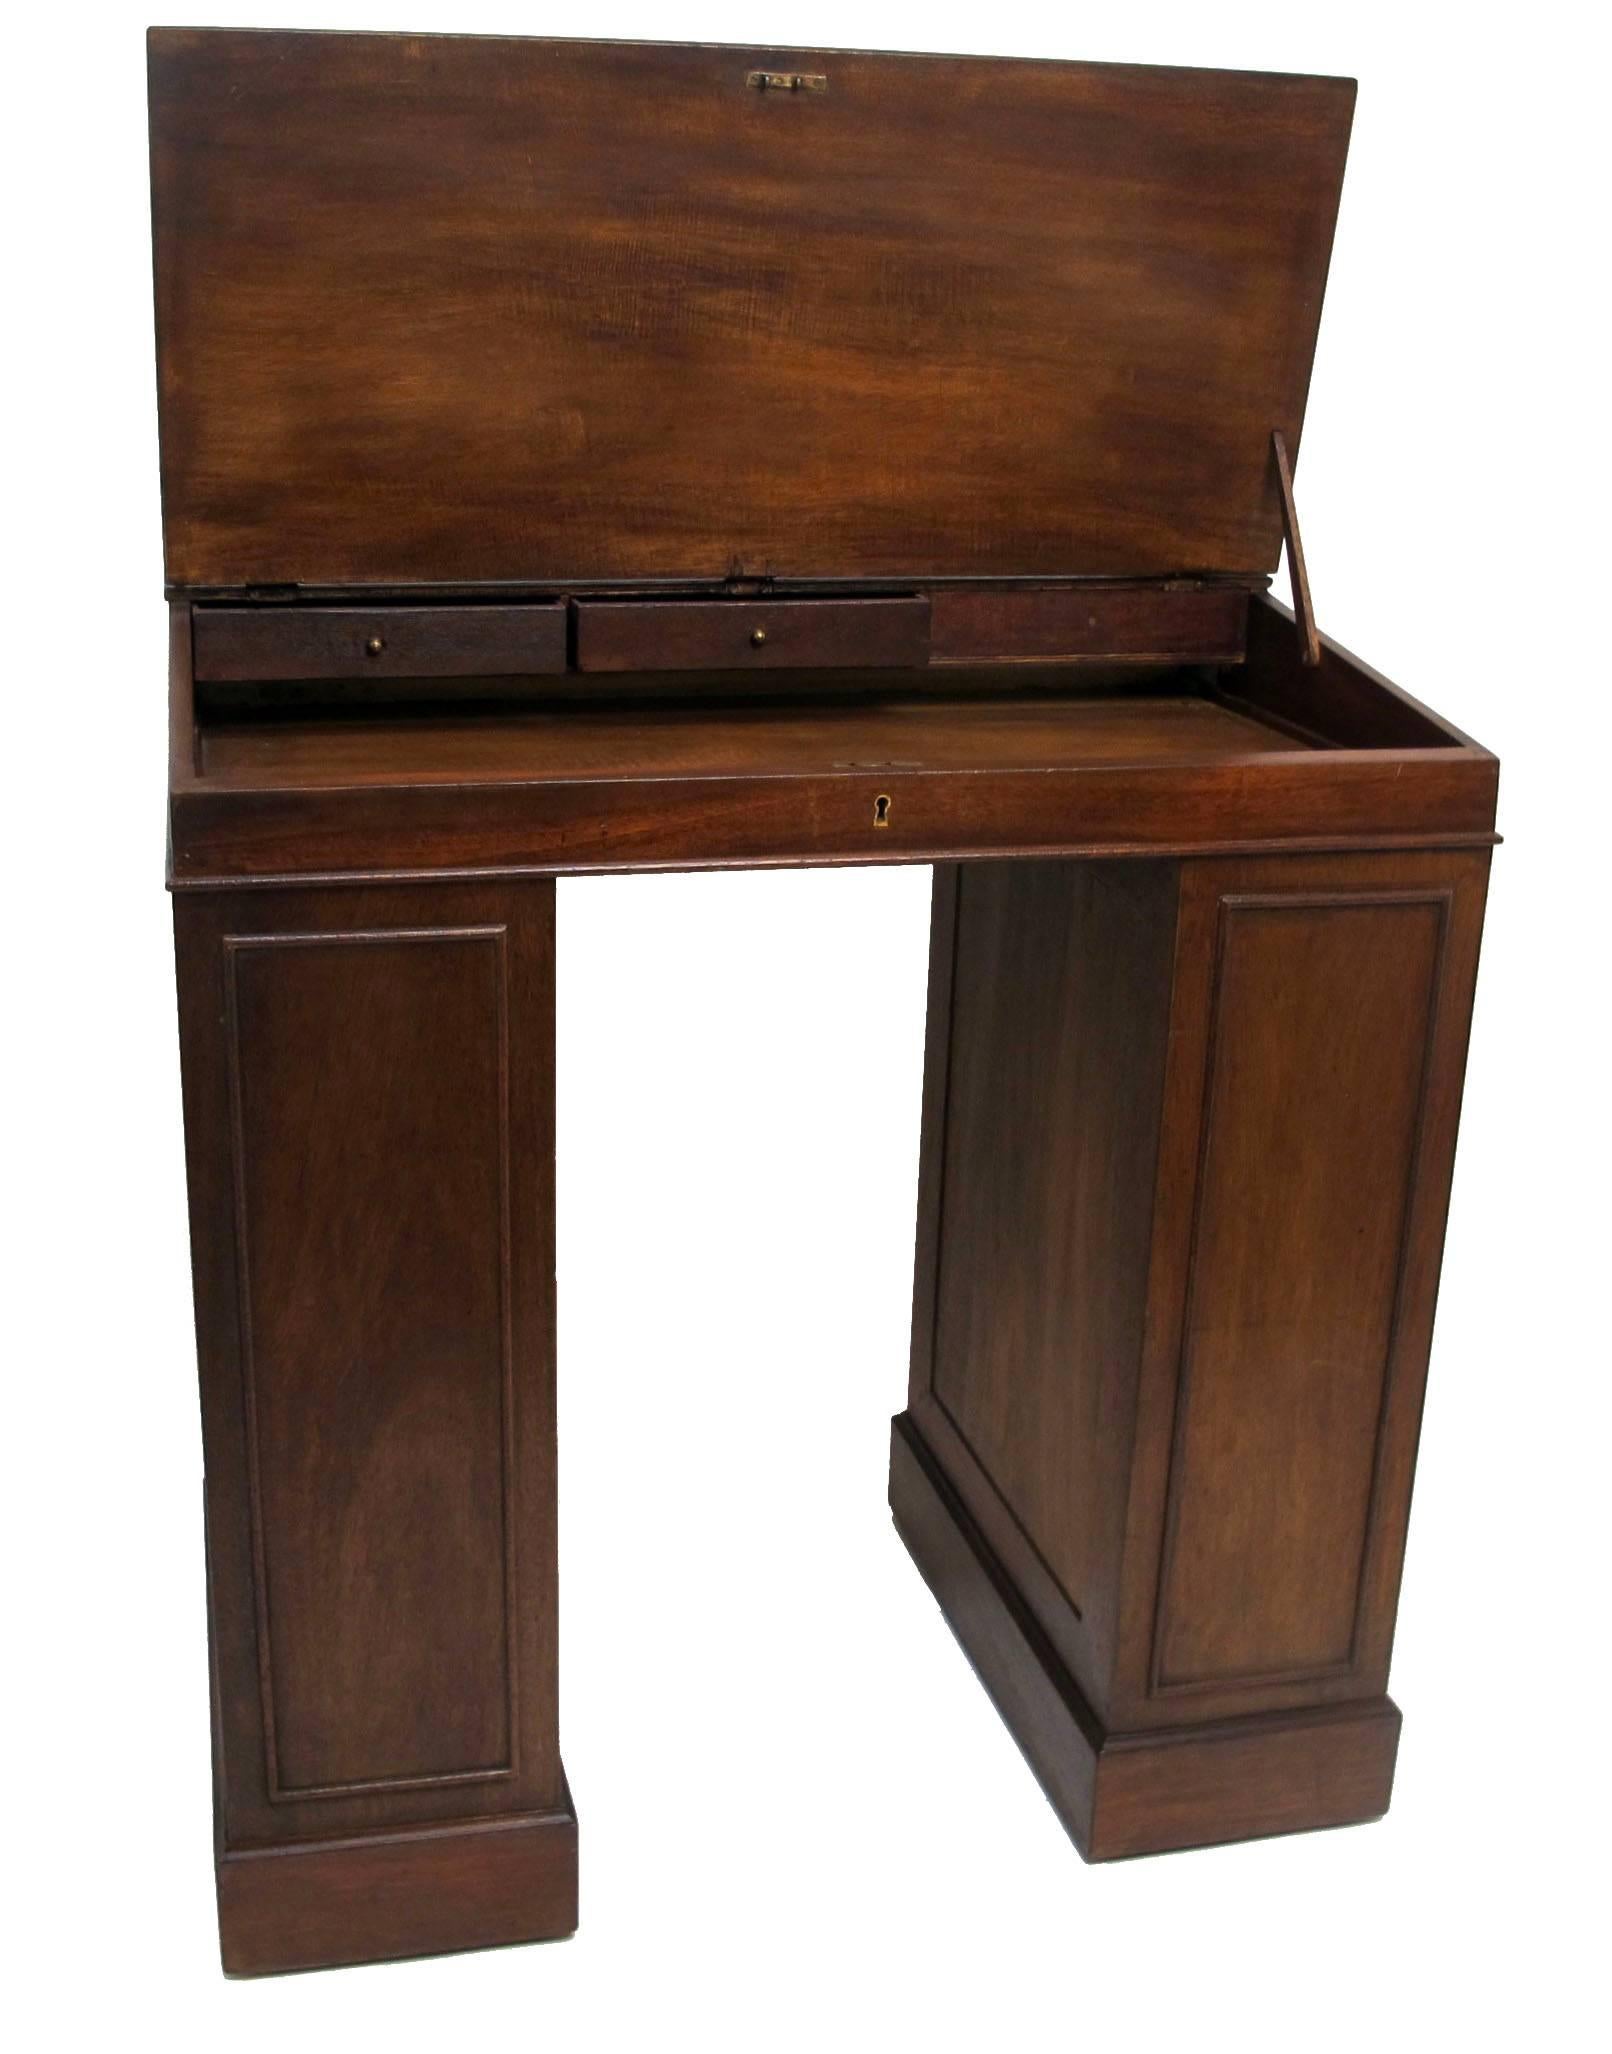 Mahogany ship's desk with inset black leather sloped writing surface, opening to reveal a fitted interior with three drawers and separate drawer for ink and quills. Flanked on either side by bookshelves, England, circa 1880.